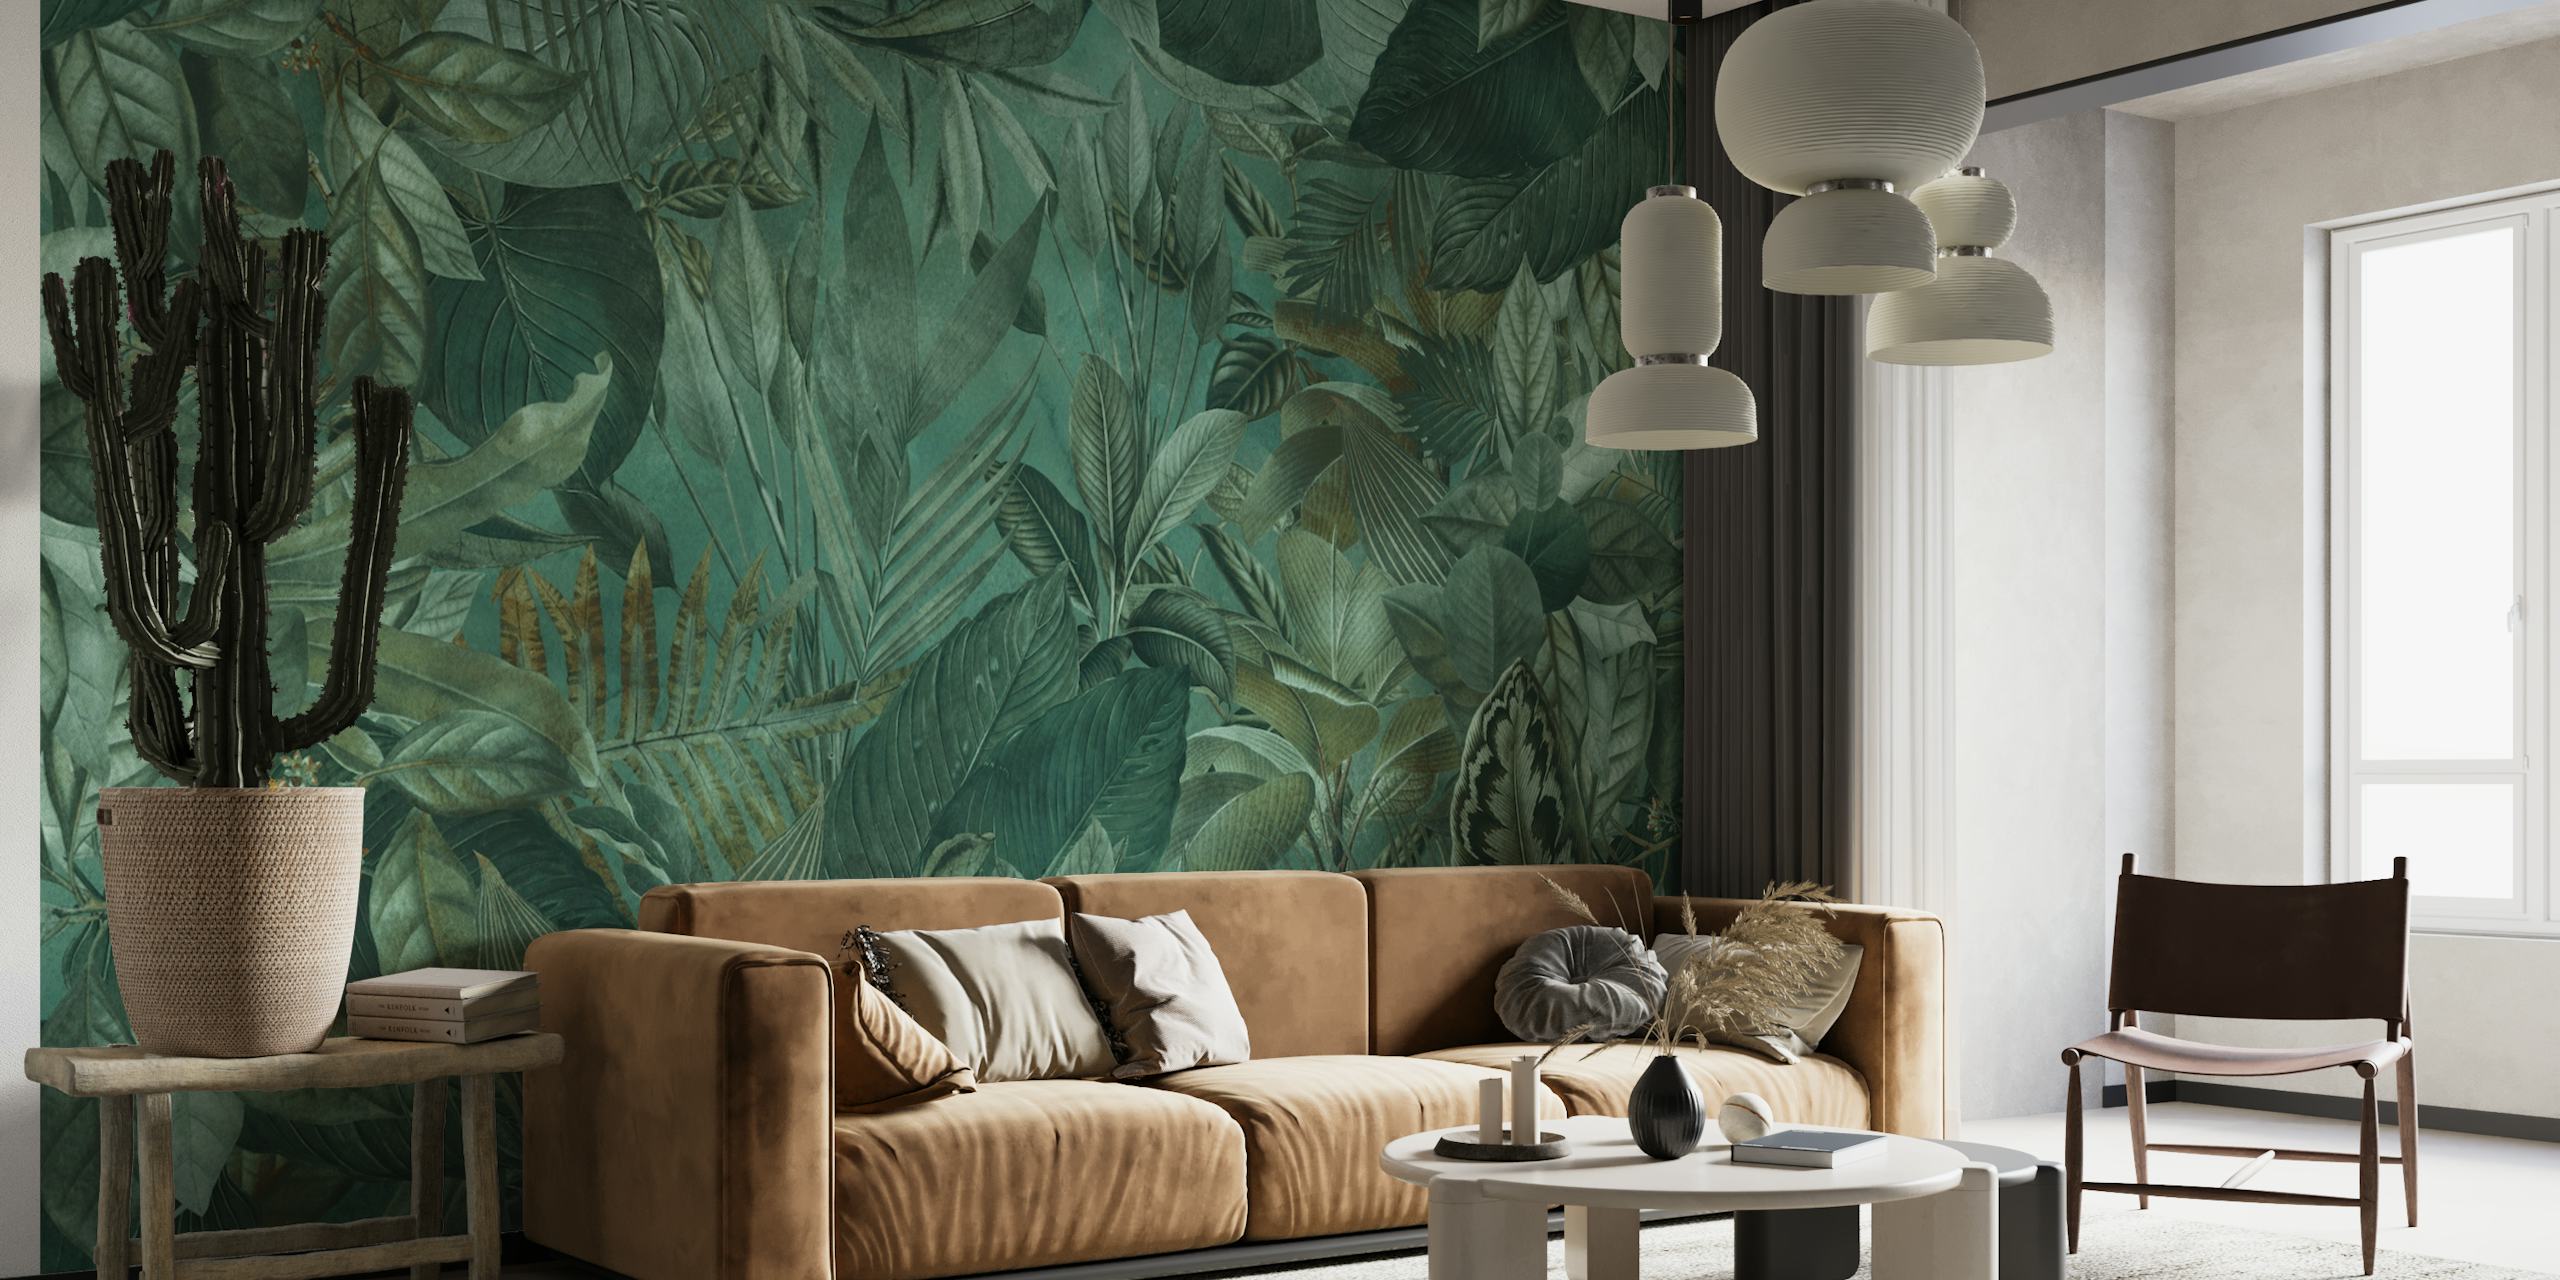 Emerald green tropical jungle-themed wall mural with dense foliage and floral patterns